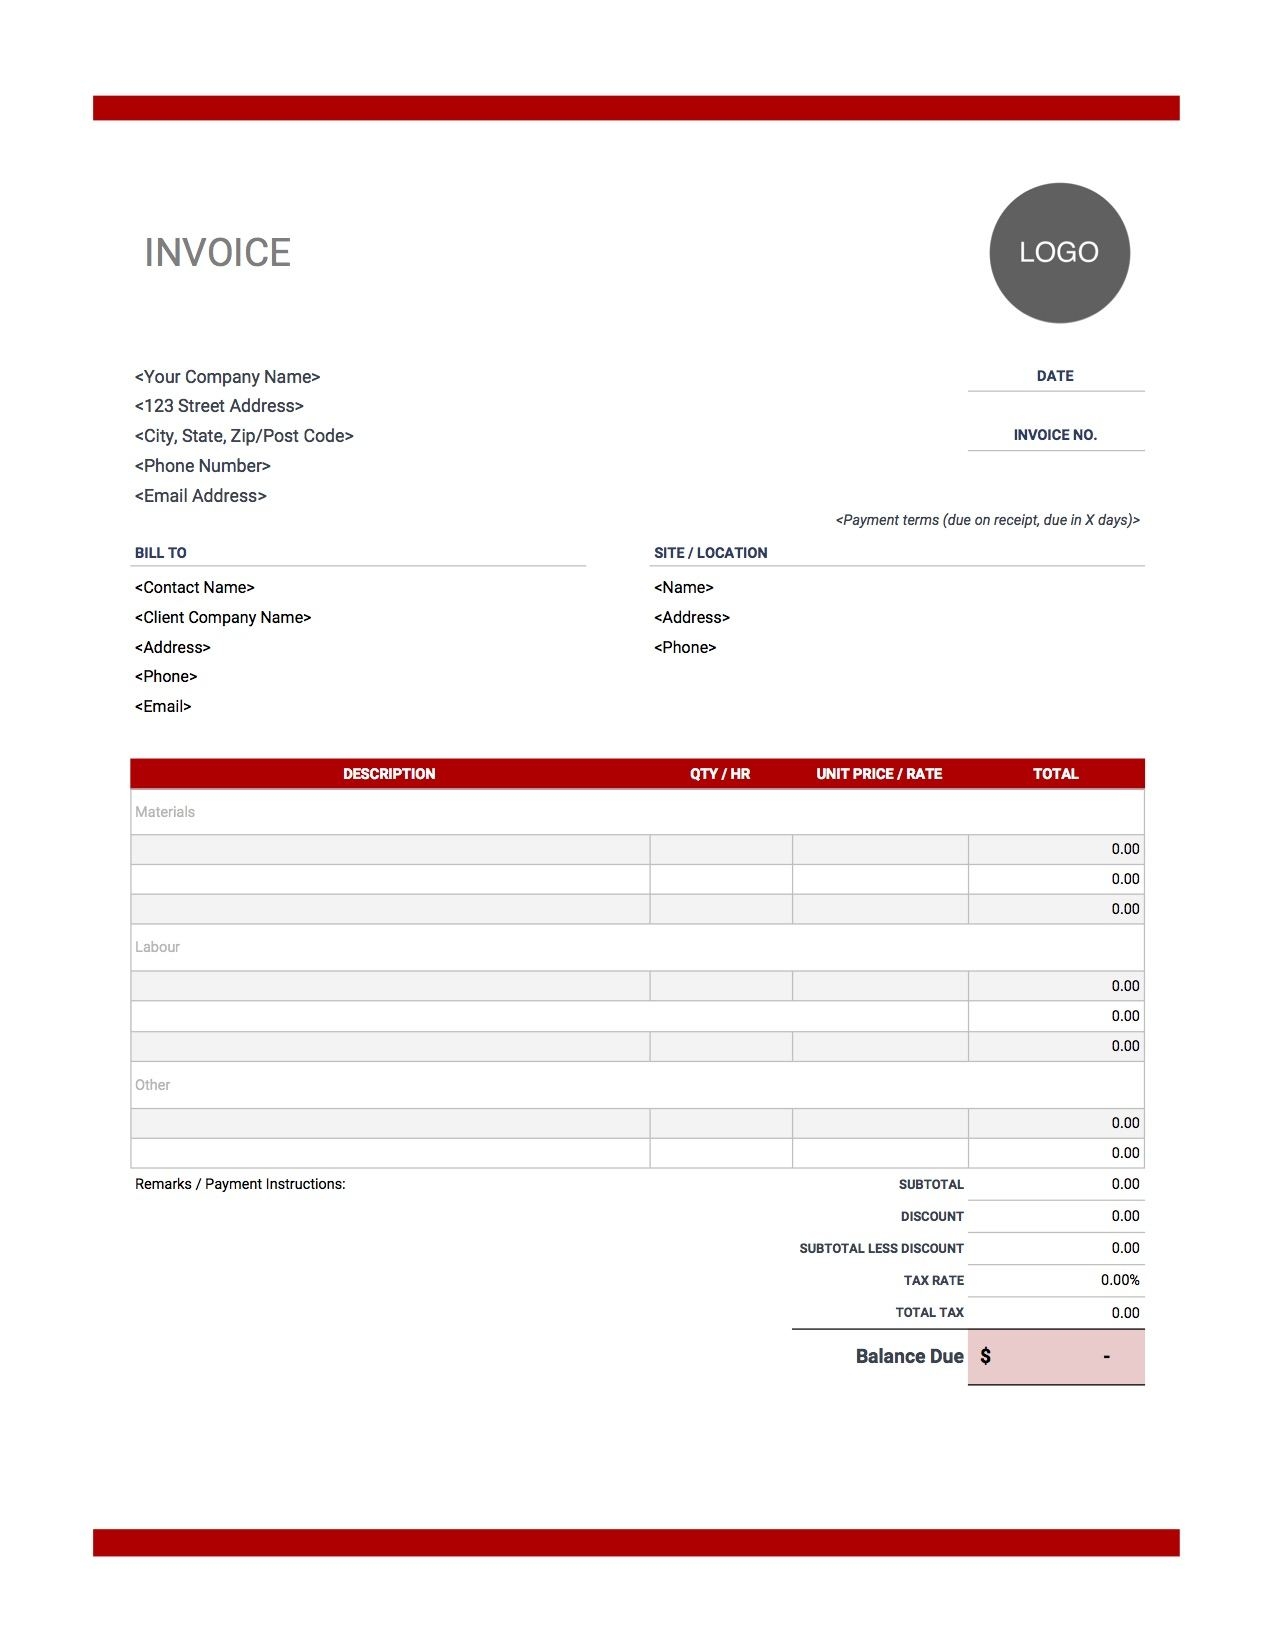 A Good Invoice Structure